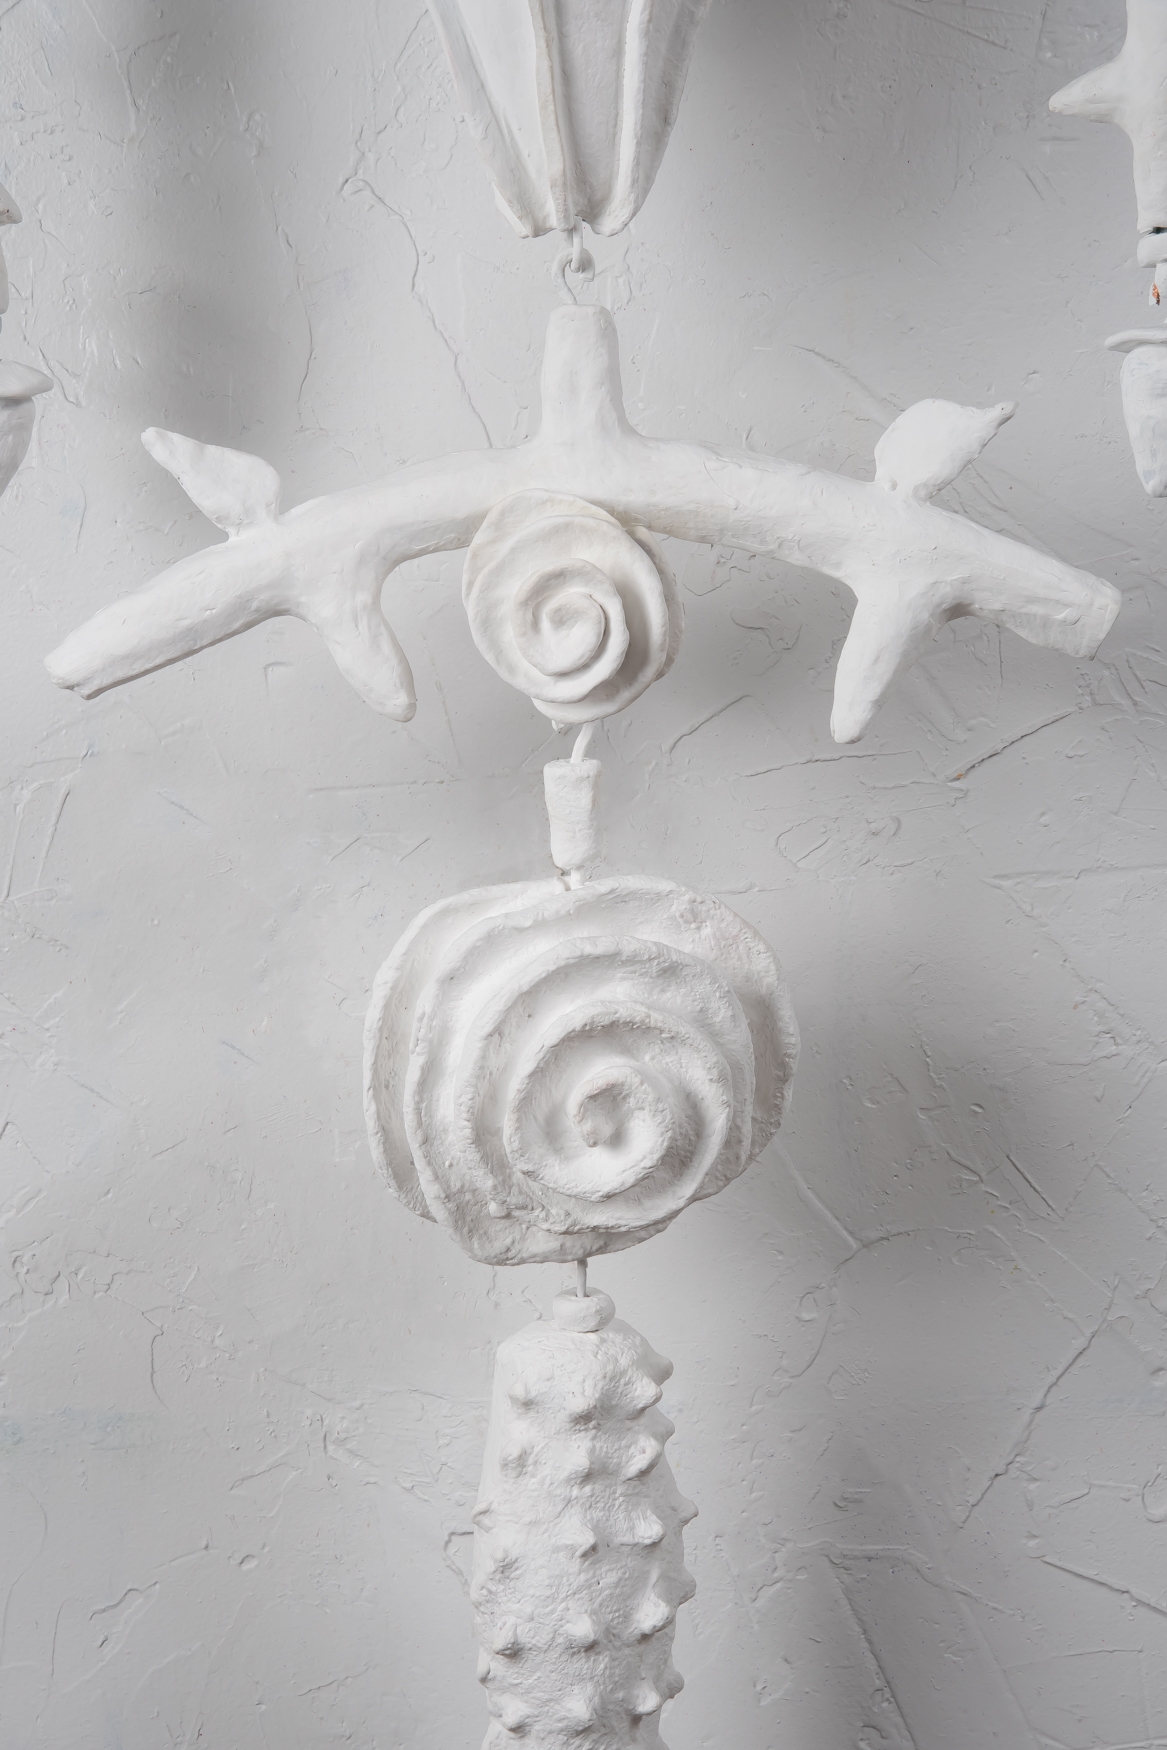 A close-up detail of the mixed-media single strand amulet "White" by Oklahoma artist Paul Medina. White is 22 x 70 inches and made of clay. string, wood, and steel.